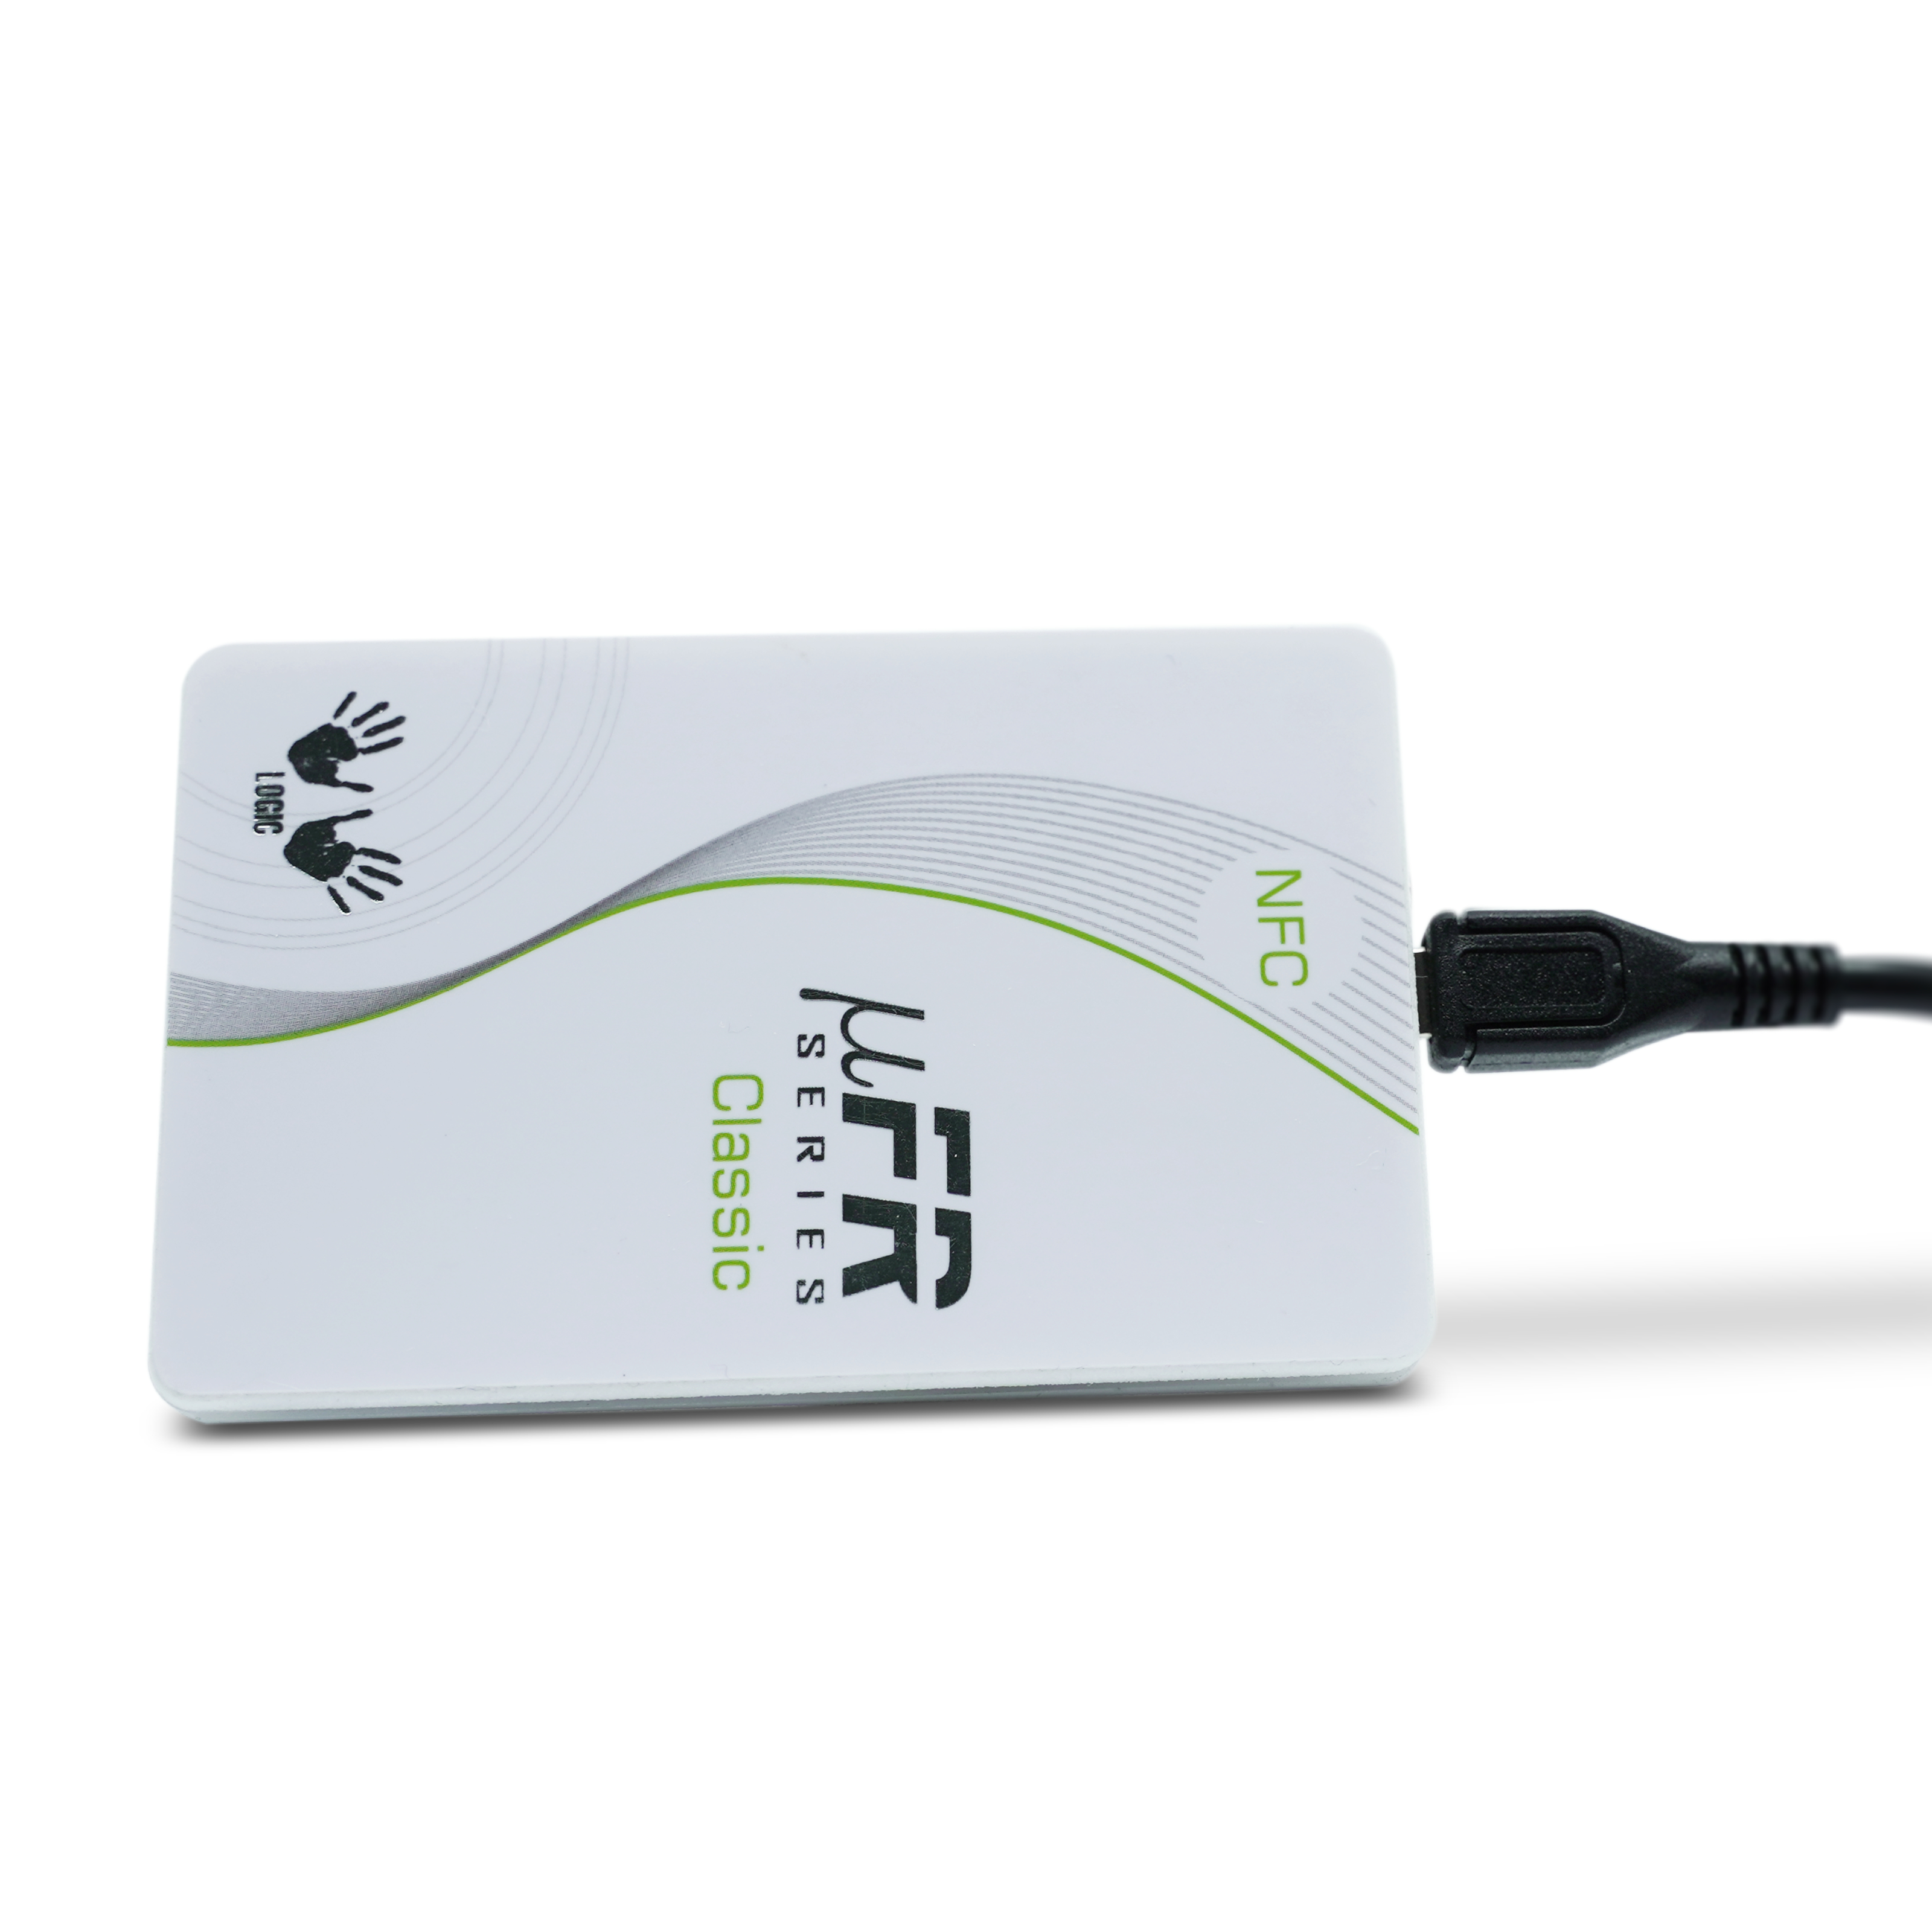 NFC Reader / Writer - uFR Classic CS - white / green - with range booster function